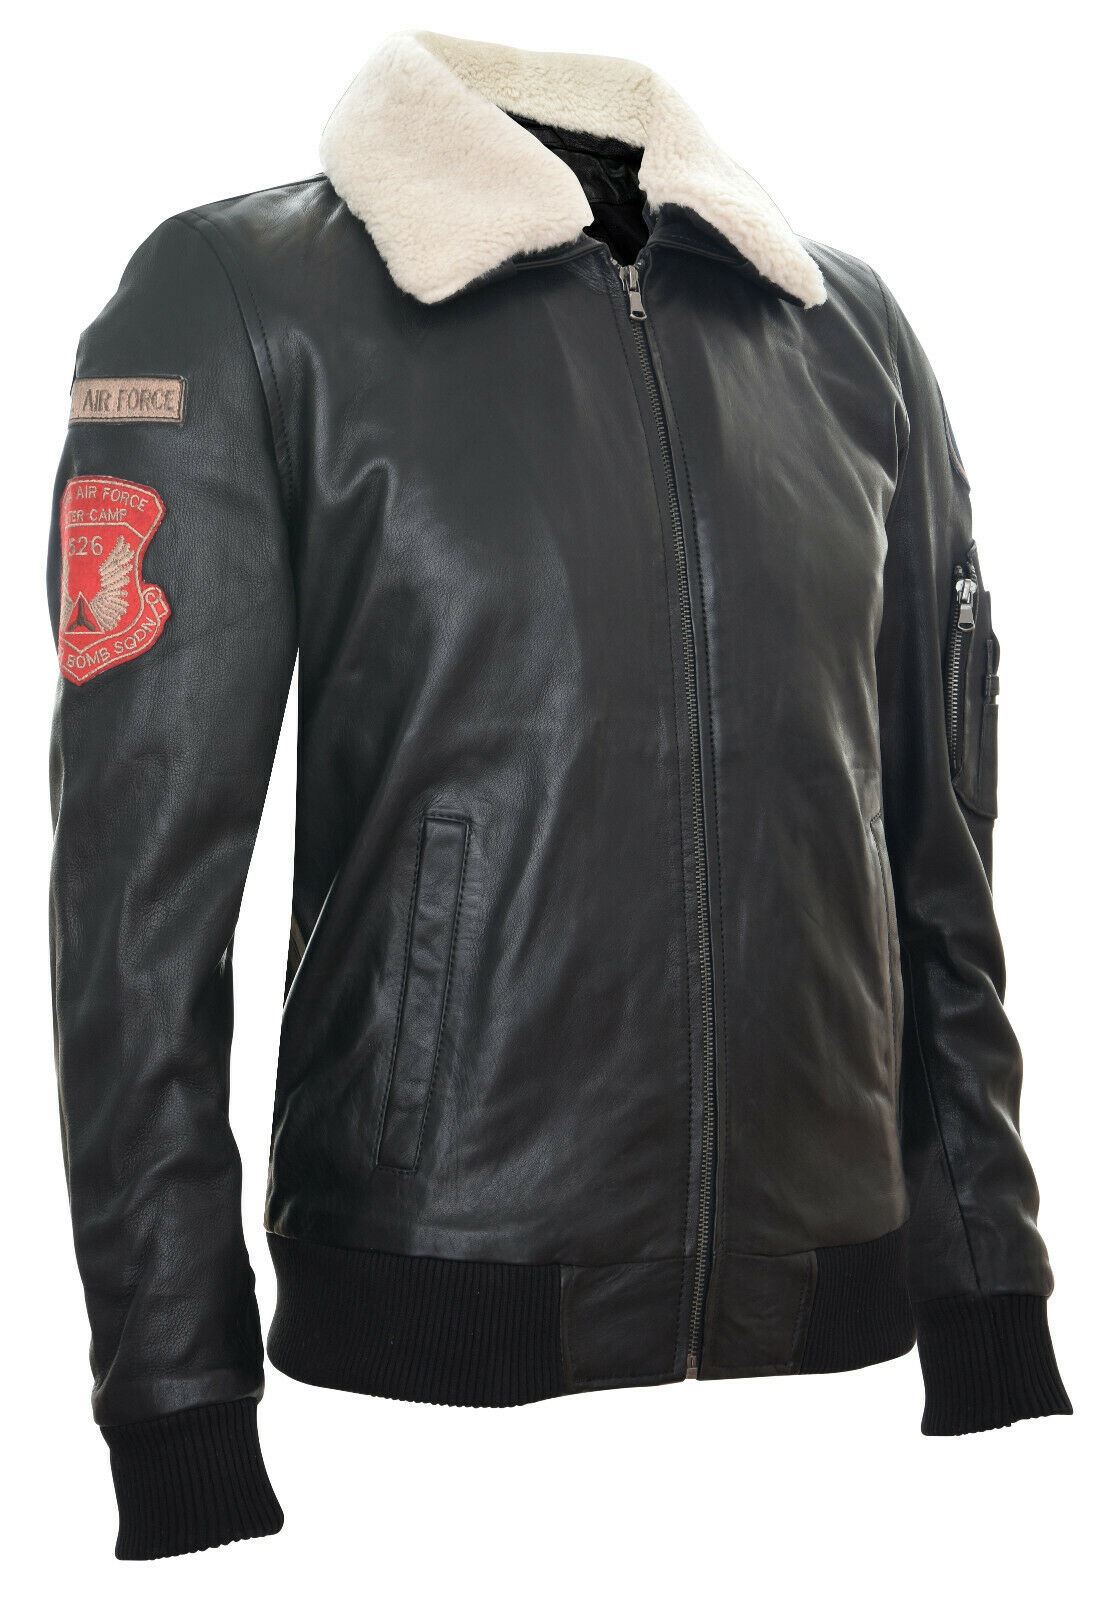 Black Leather Air Force Bomber Jacket with Detachable Collar - Miami - Upperclass Fashions 